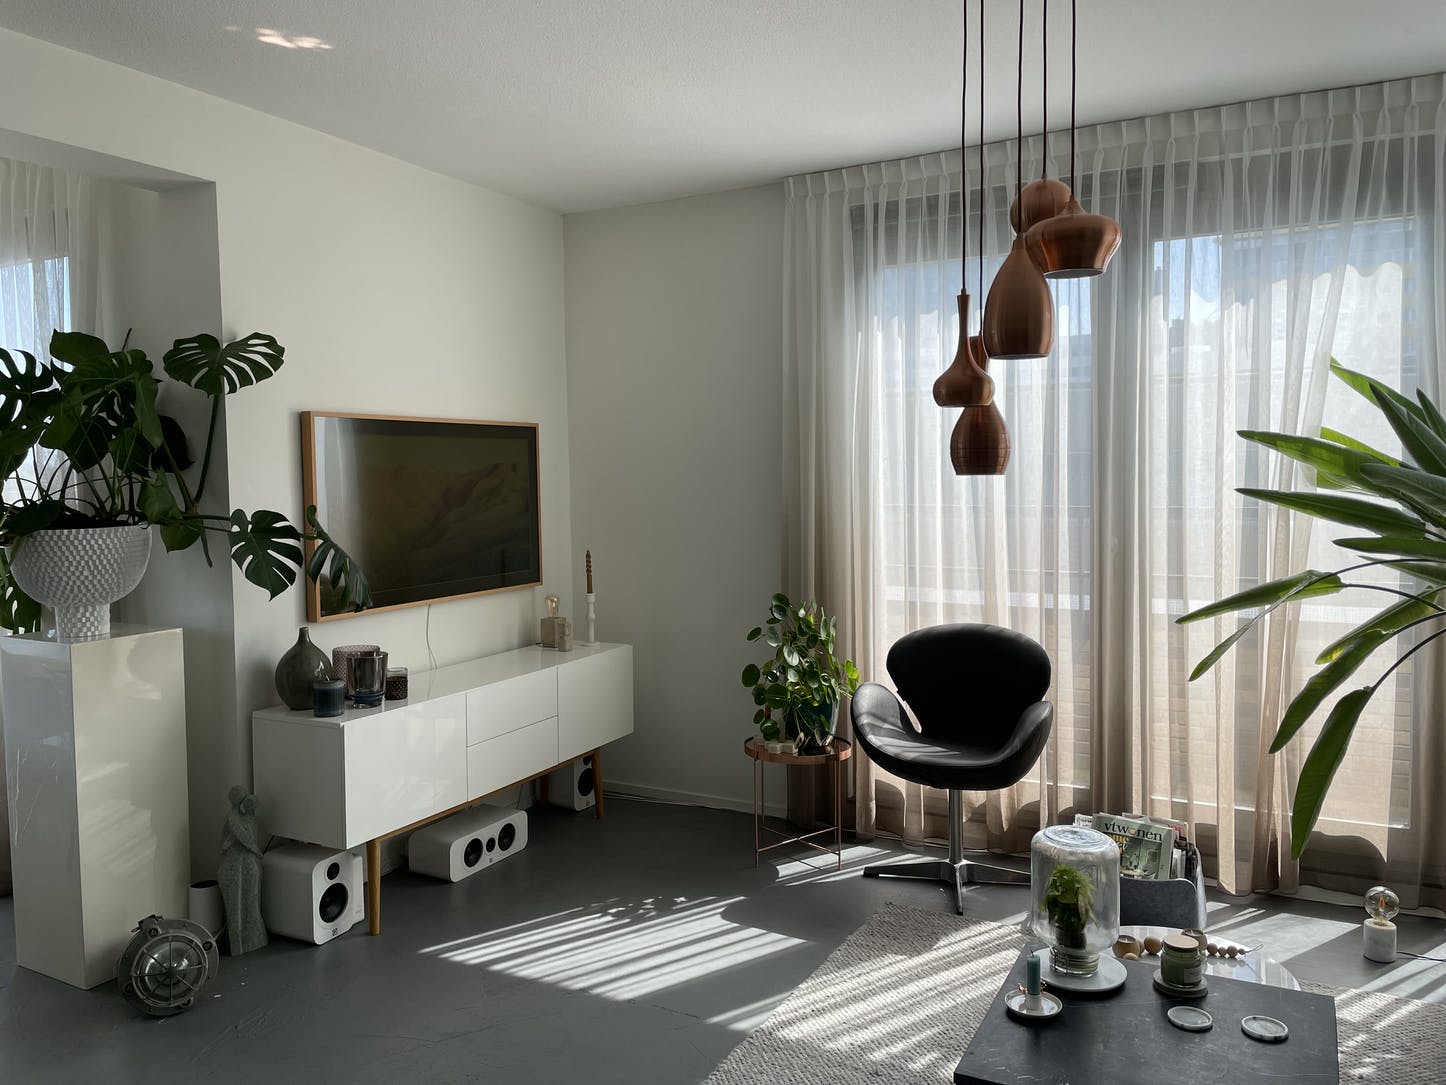 Ringdijk - Exclusive penthouse in Amsterdam for expats